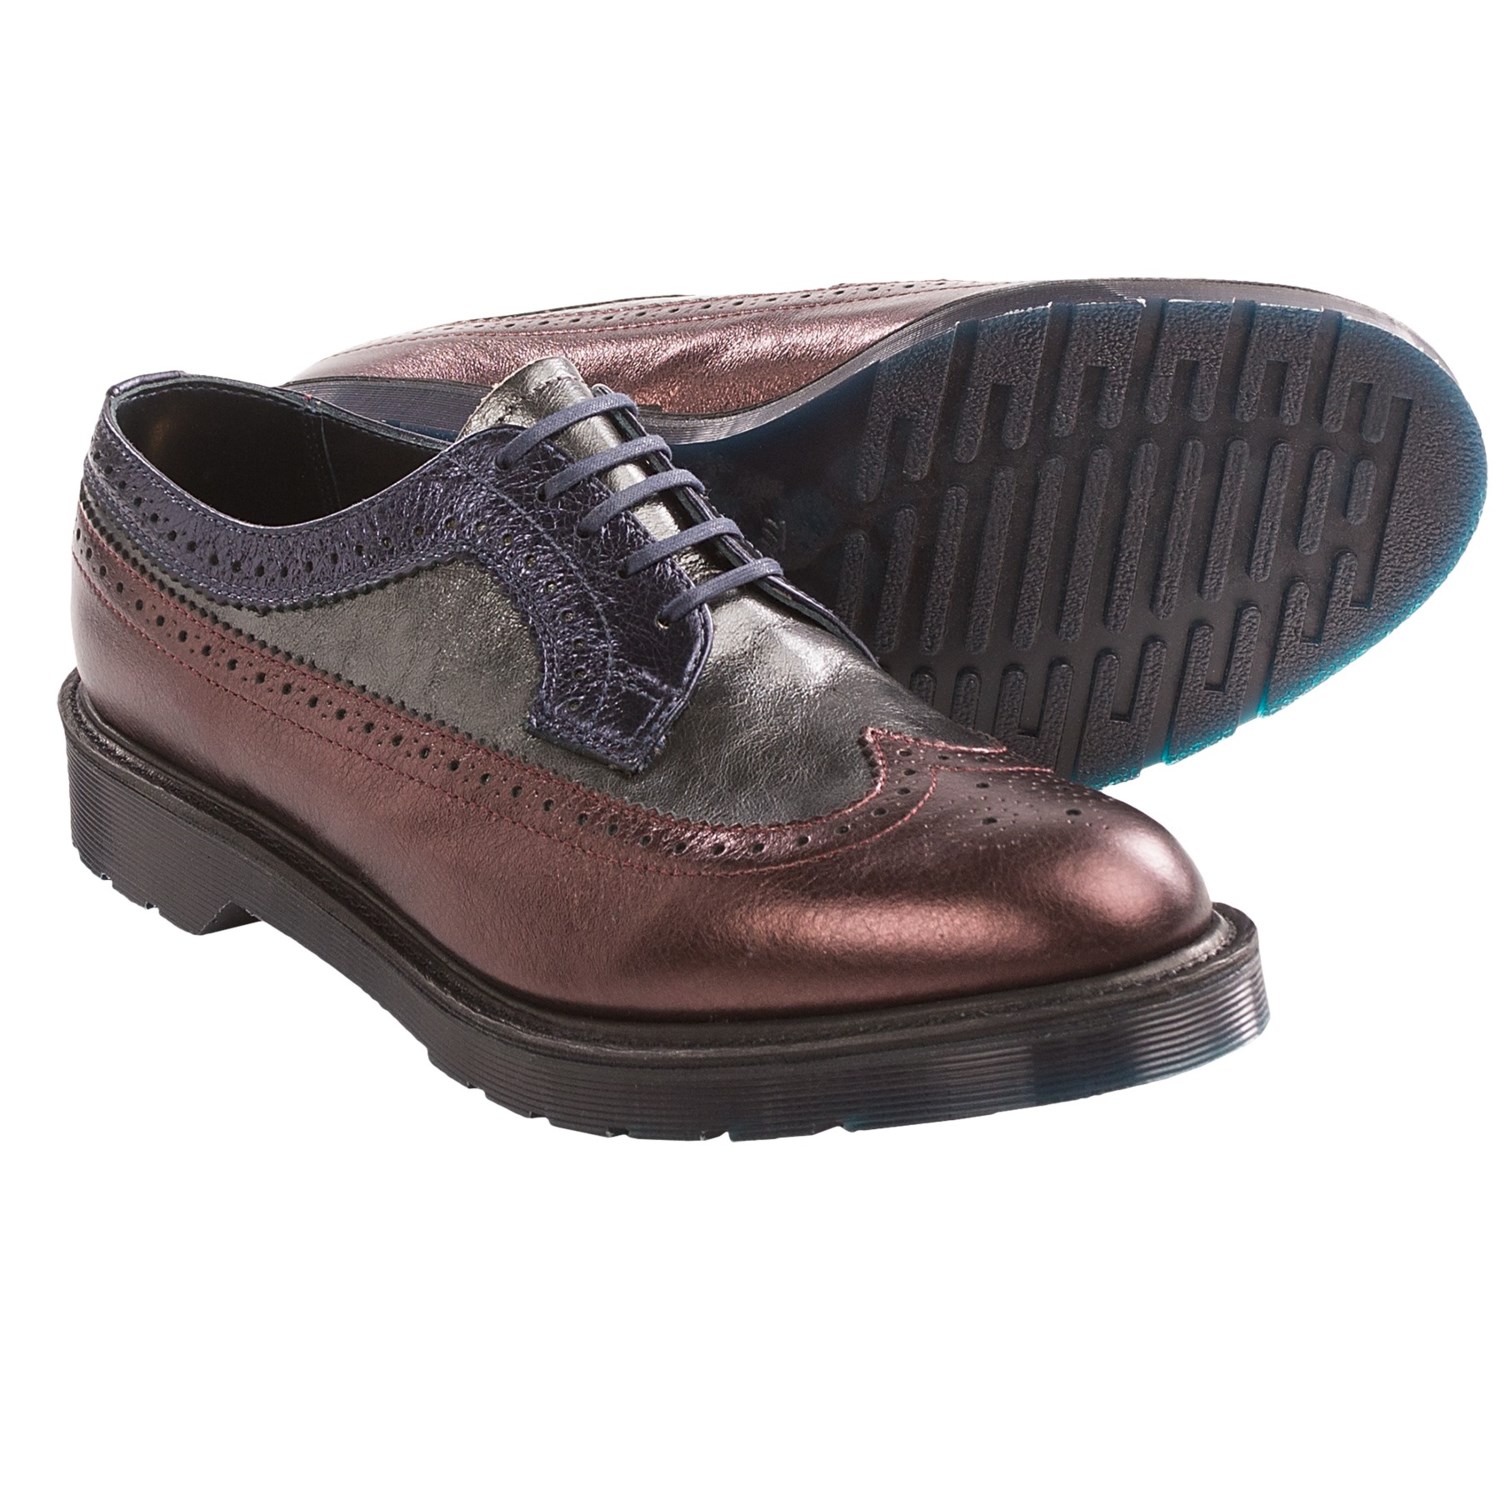 Dr. Martens Limited Edition 3989 Shoes - Oxfords, Wingtip (For Men) in ...